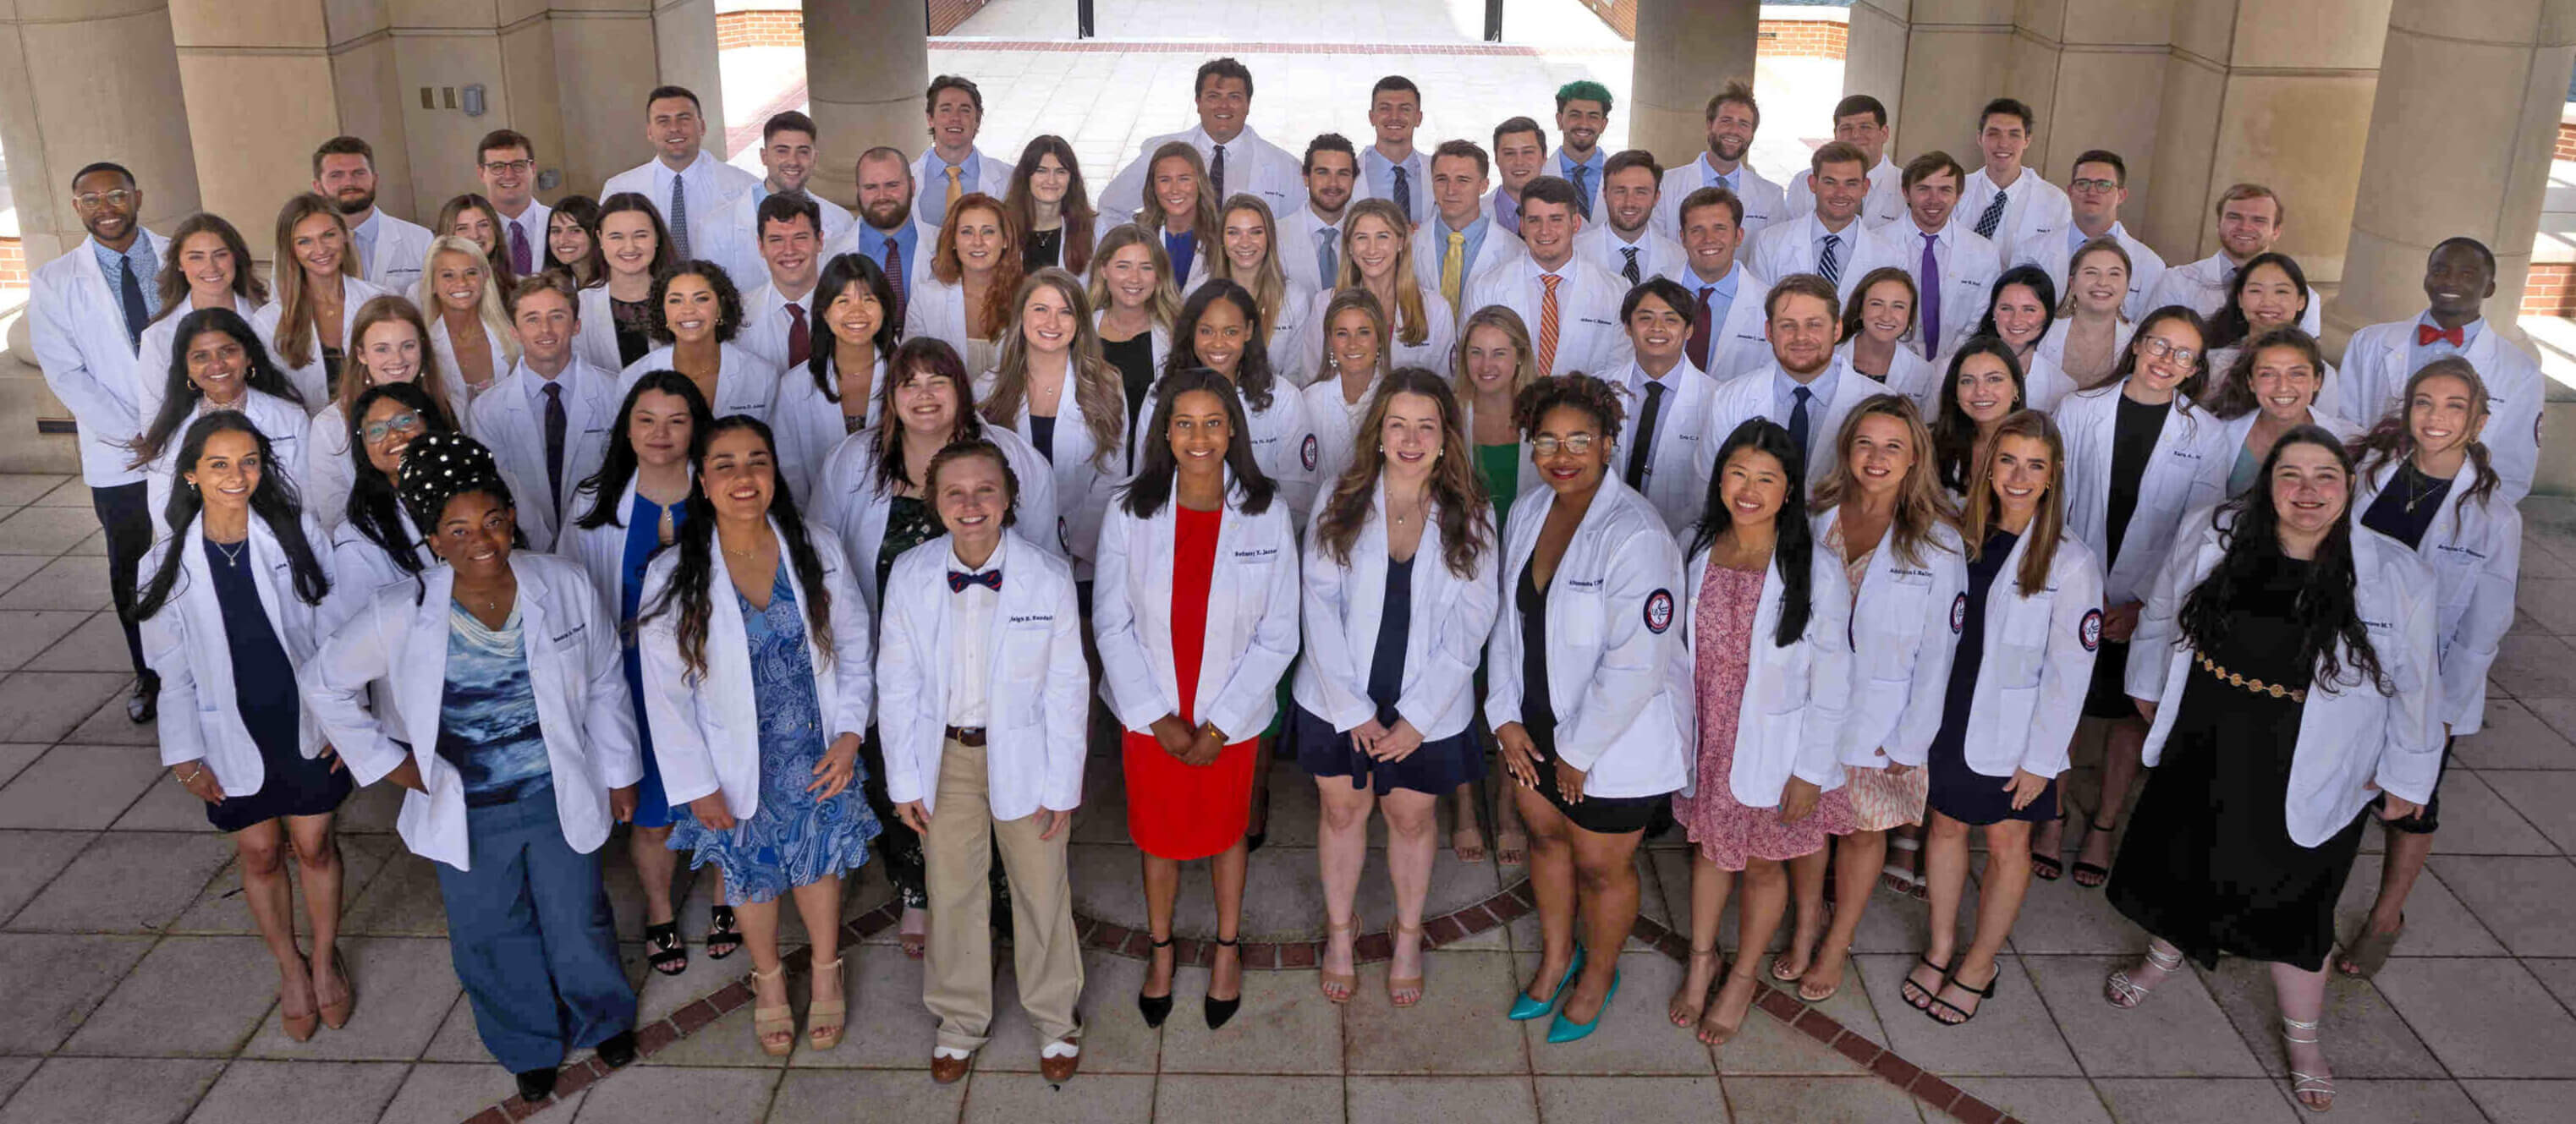 Class photo of medical students at the USA College of Medicine